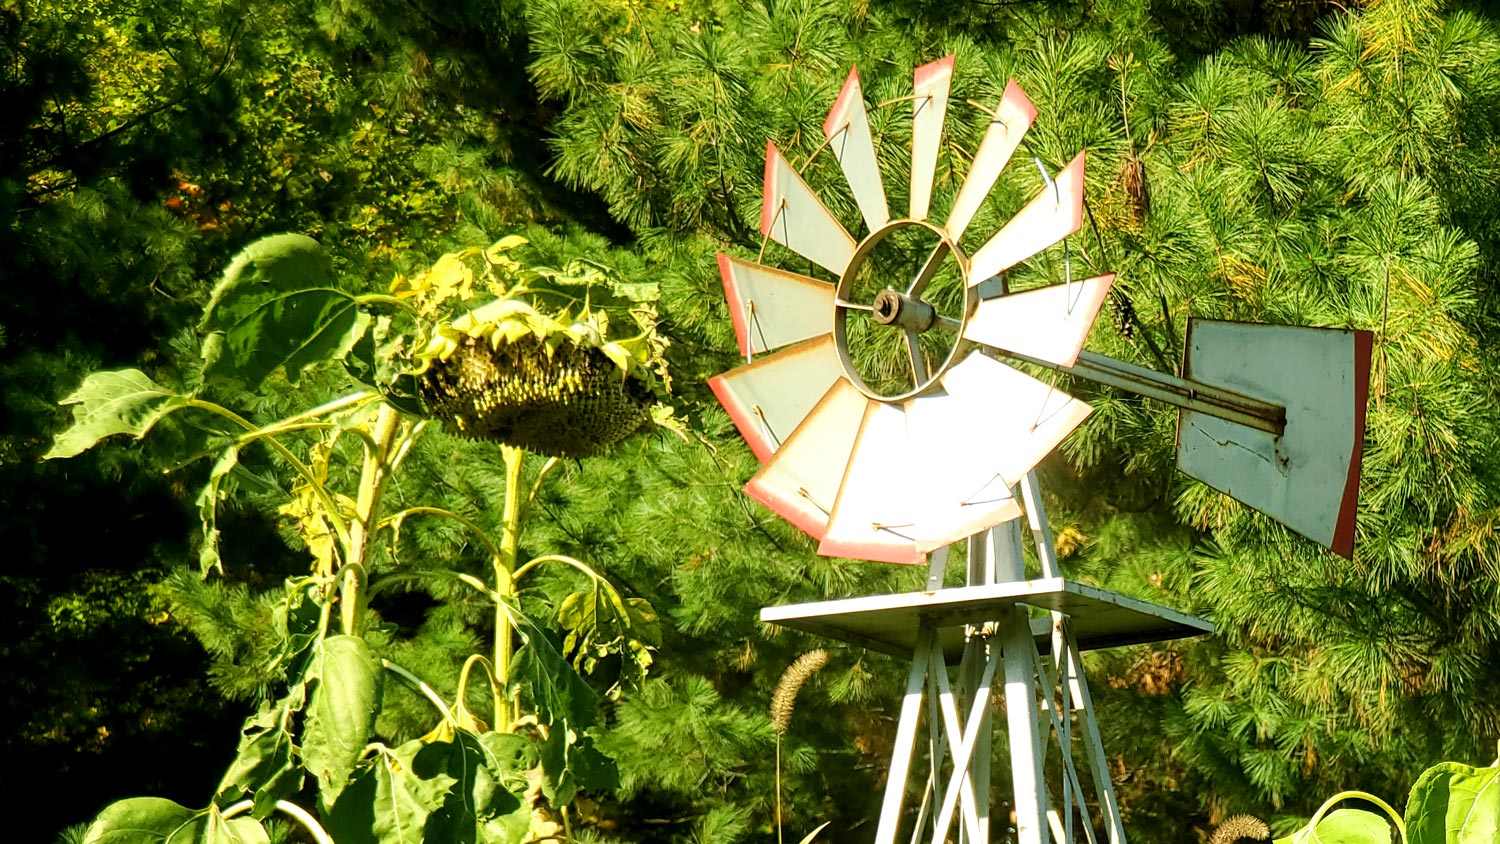 Windmill and remains of sunflower at 5 Lazy K Ranch.